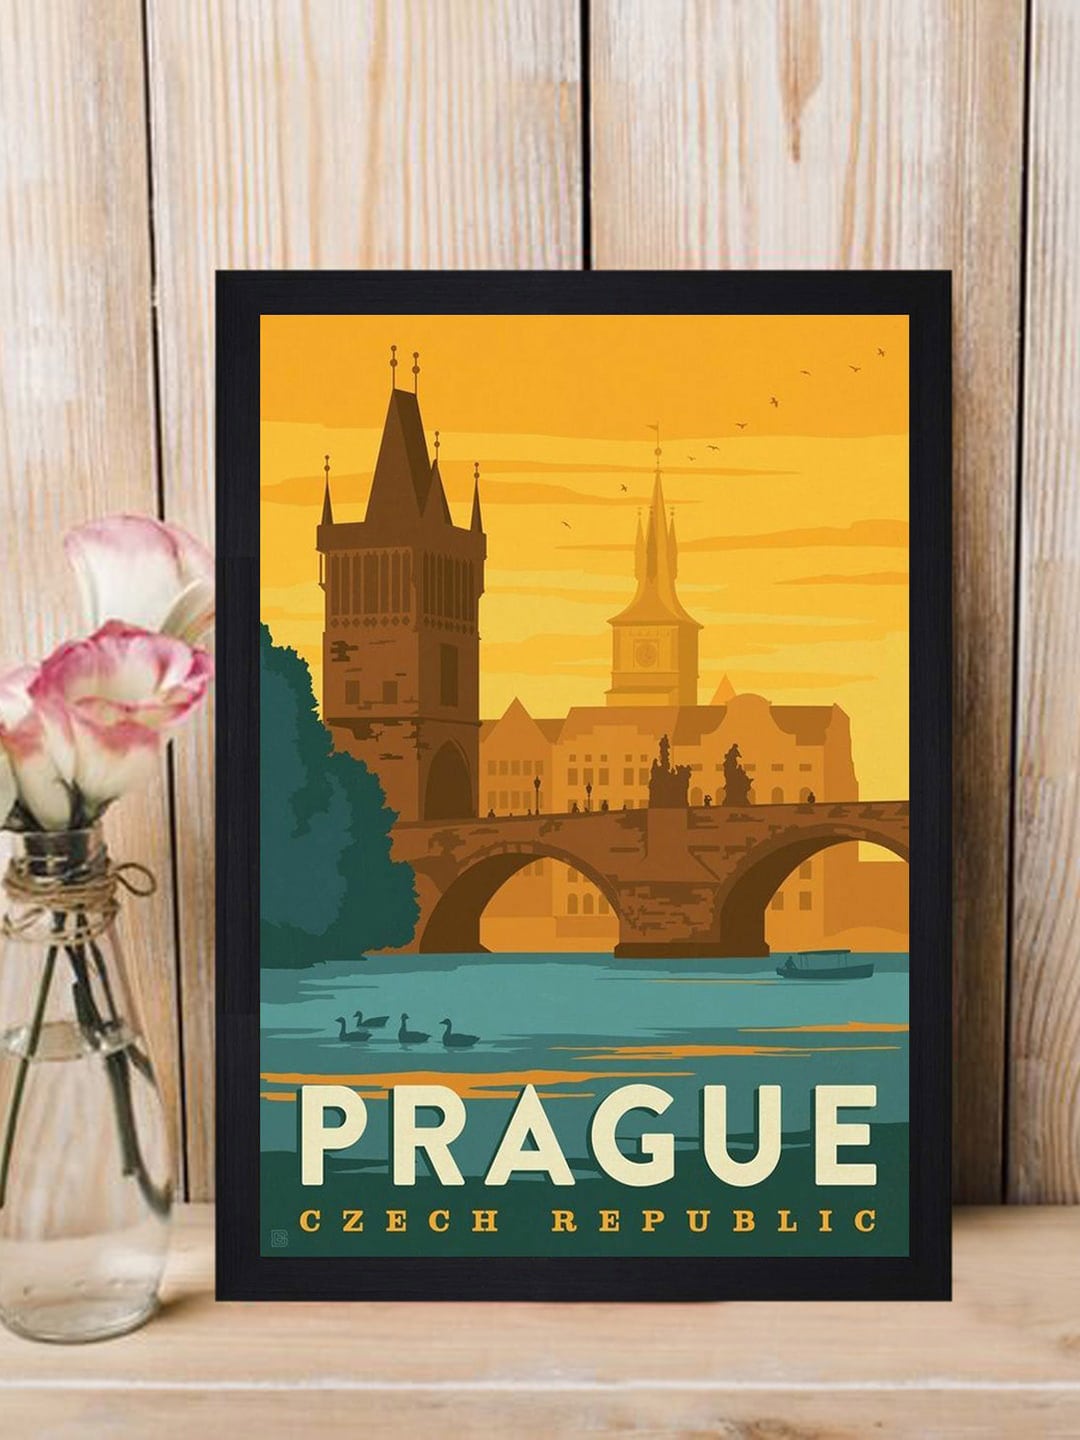 Gallery99 Yellow & Blue Prague Wall Framed Art Price in India